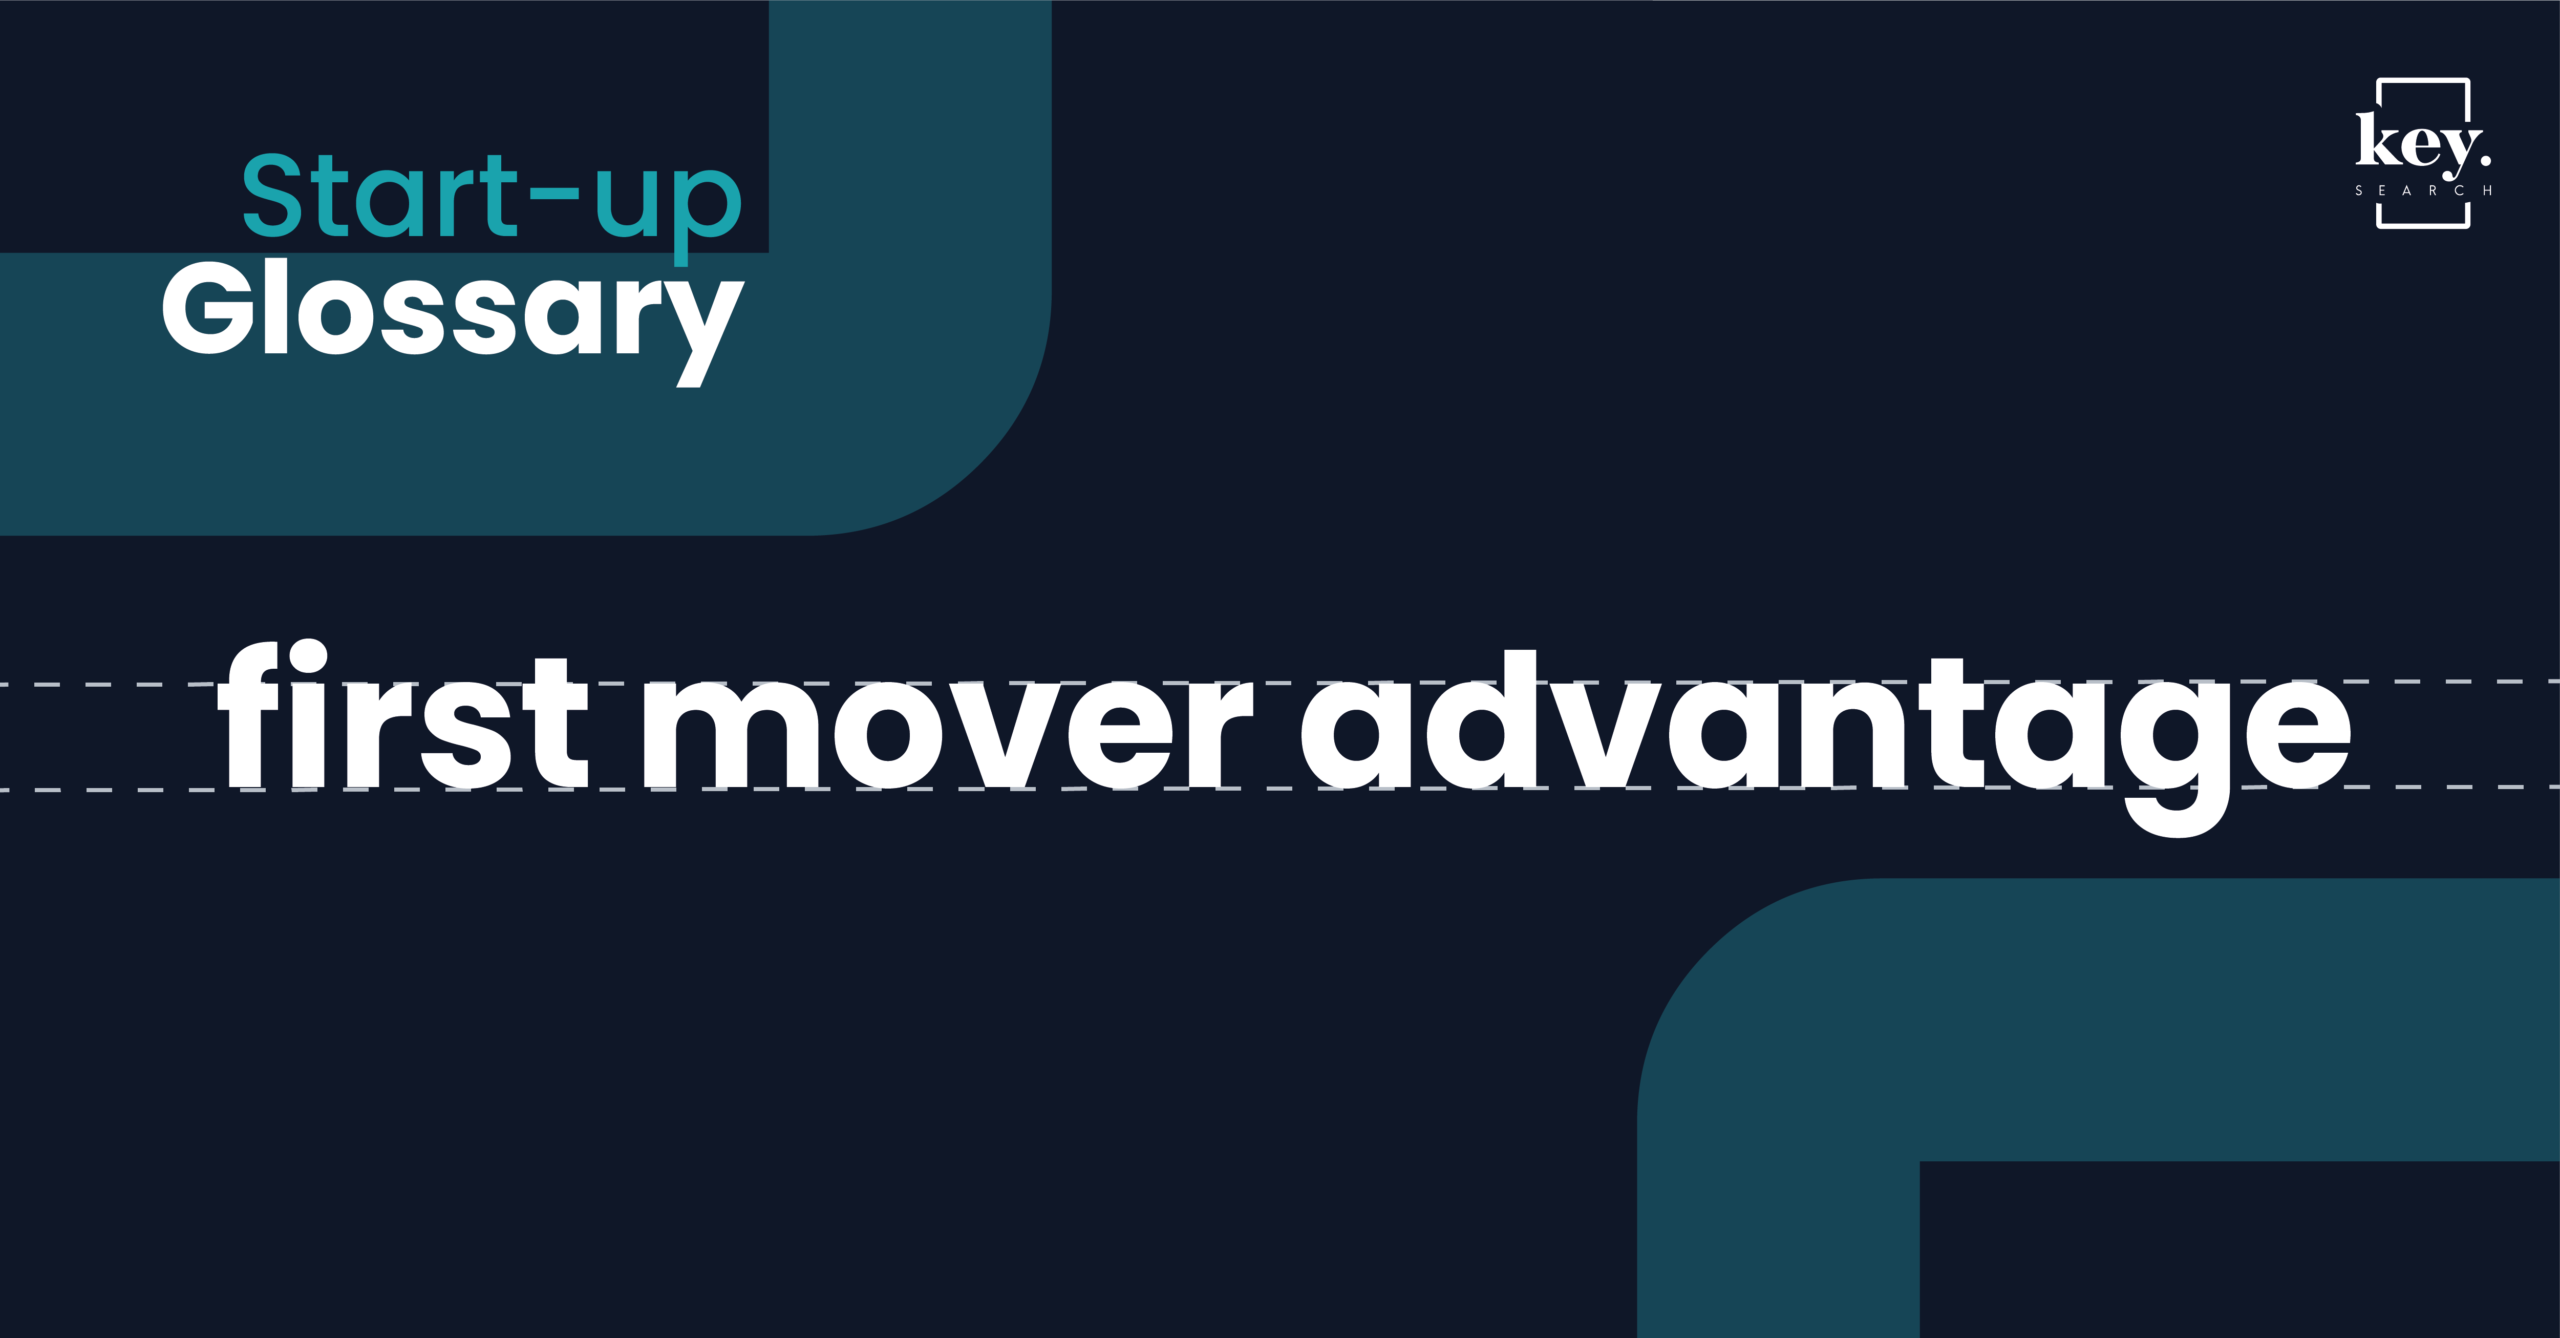 Start-up Glossary_First mover advantage